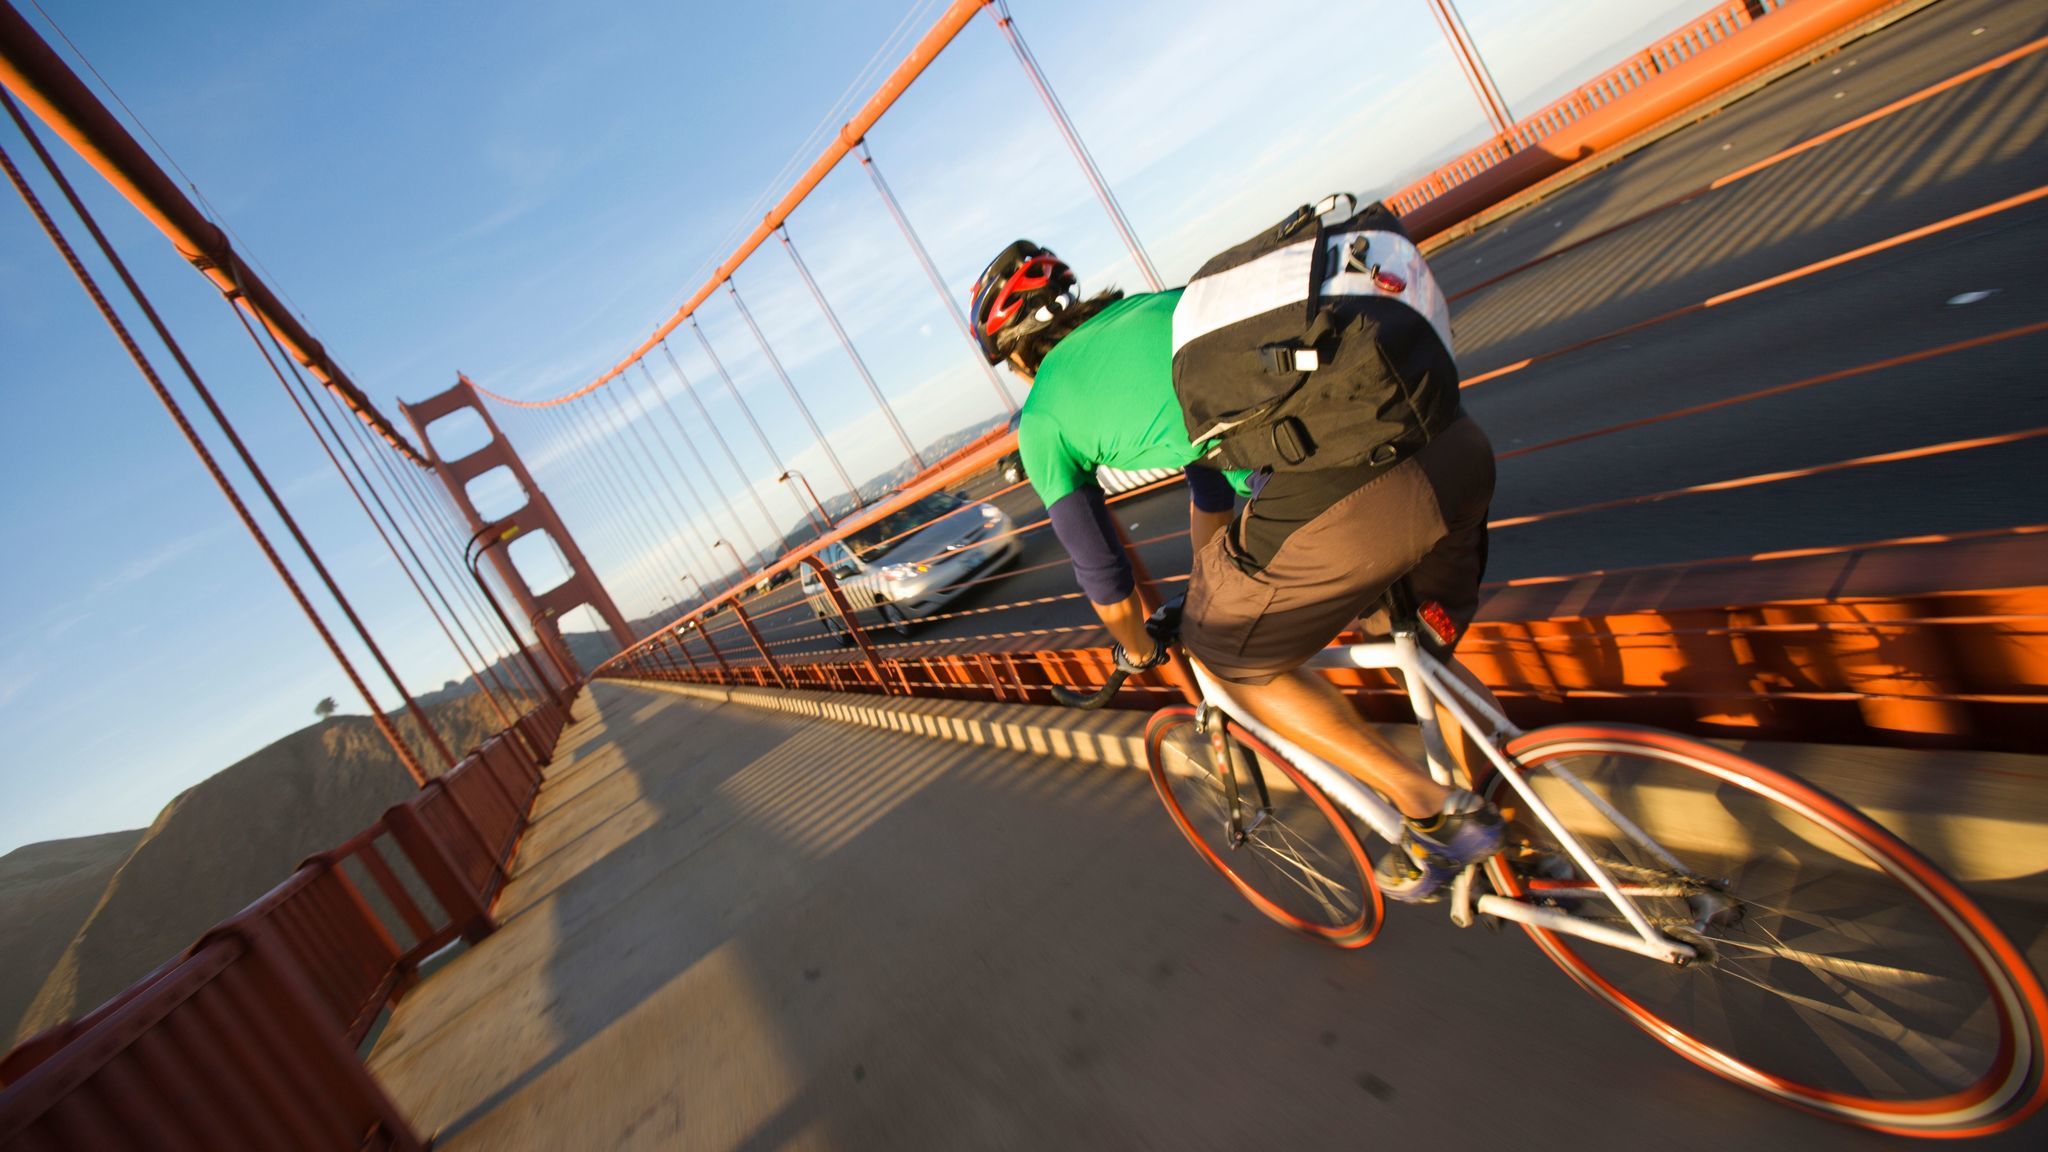 A solo cyclist crossing the Golden Gate Bridge at sunset on the commute home to the Marin near San Francisco, California.